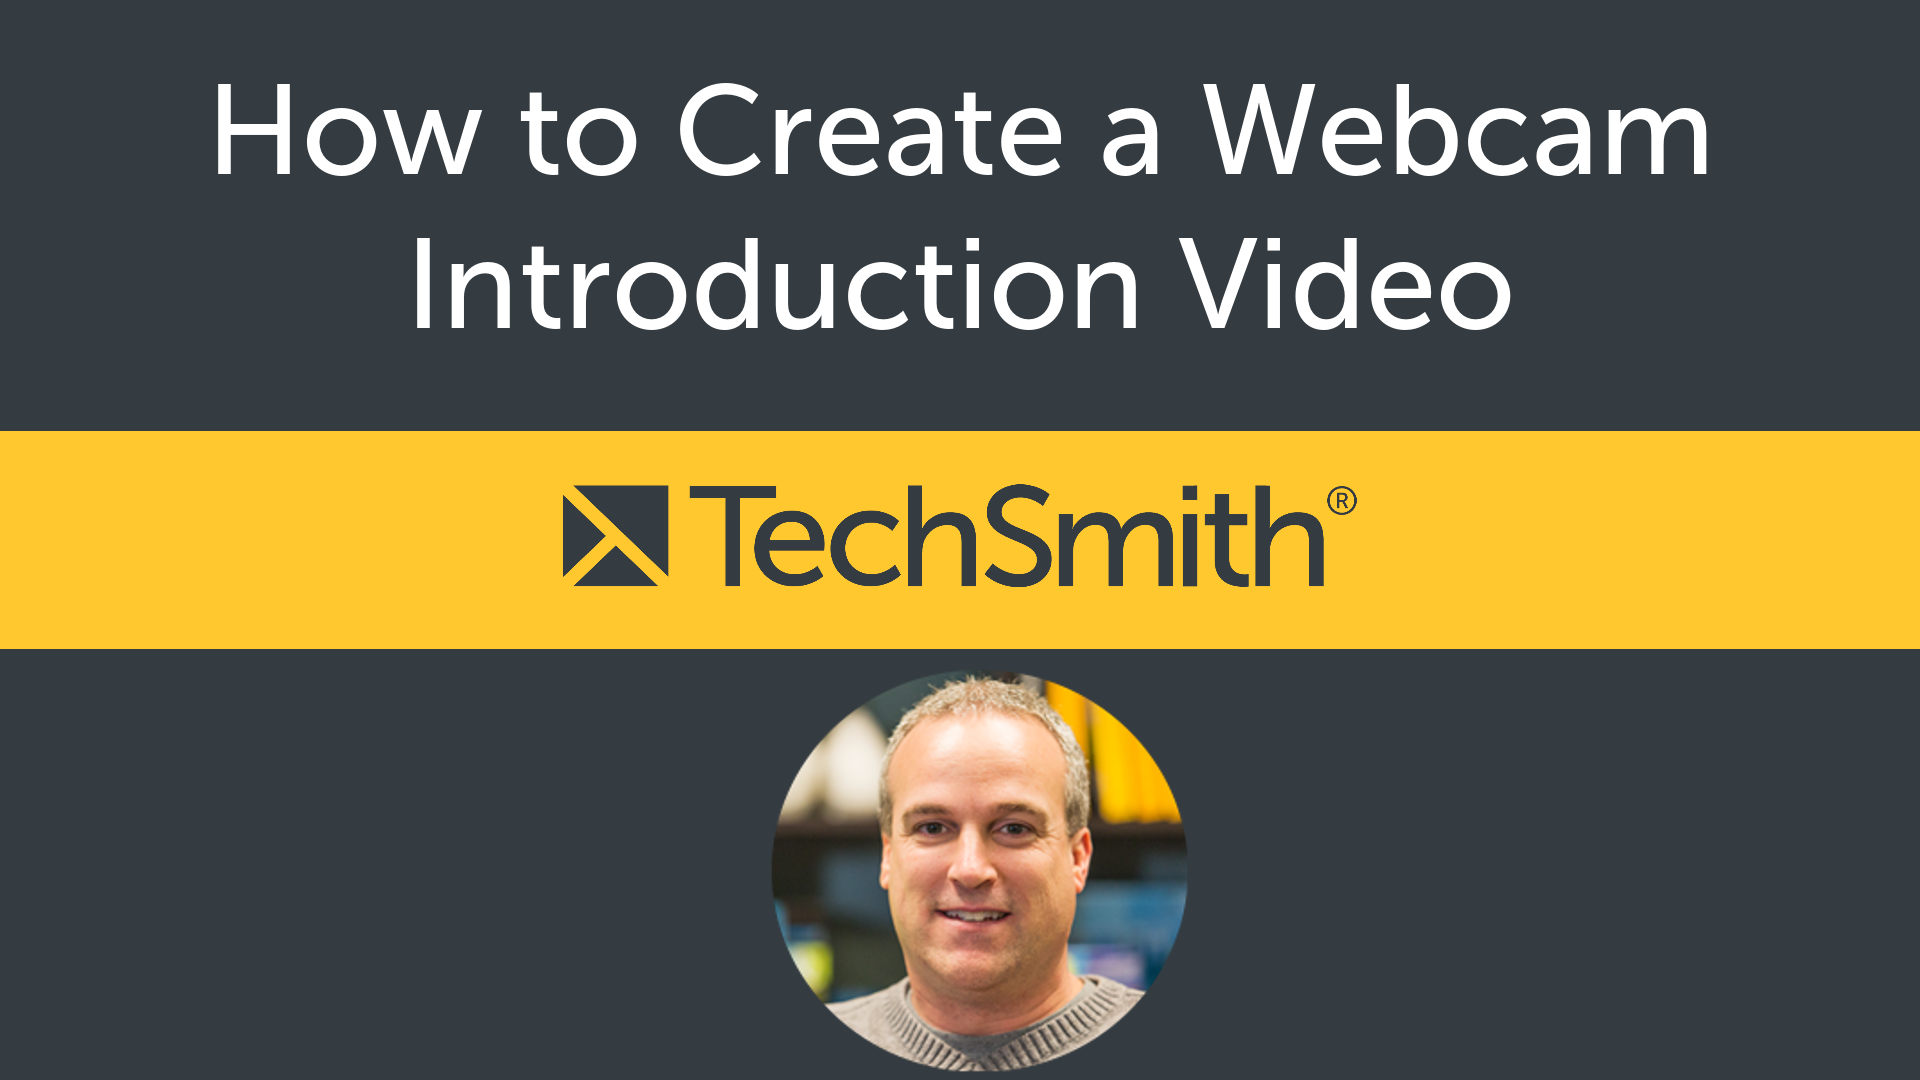 How to Create a Webcam Introduction Video v2